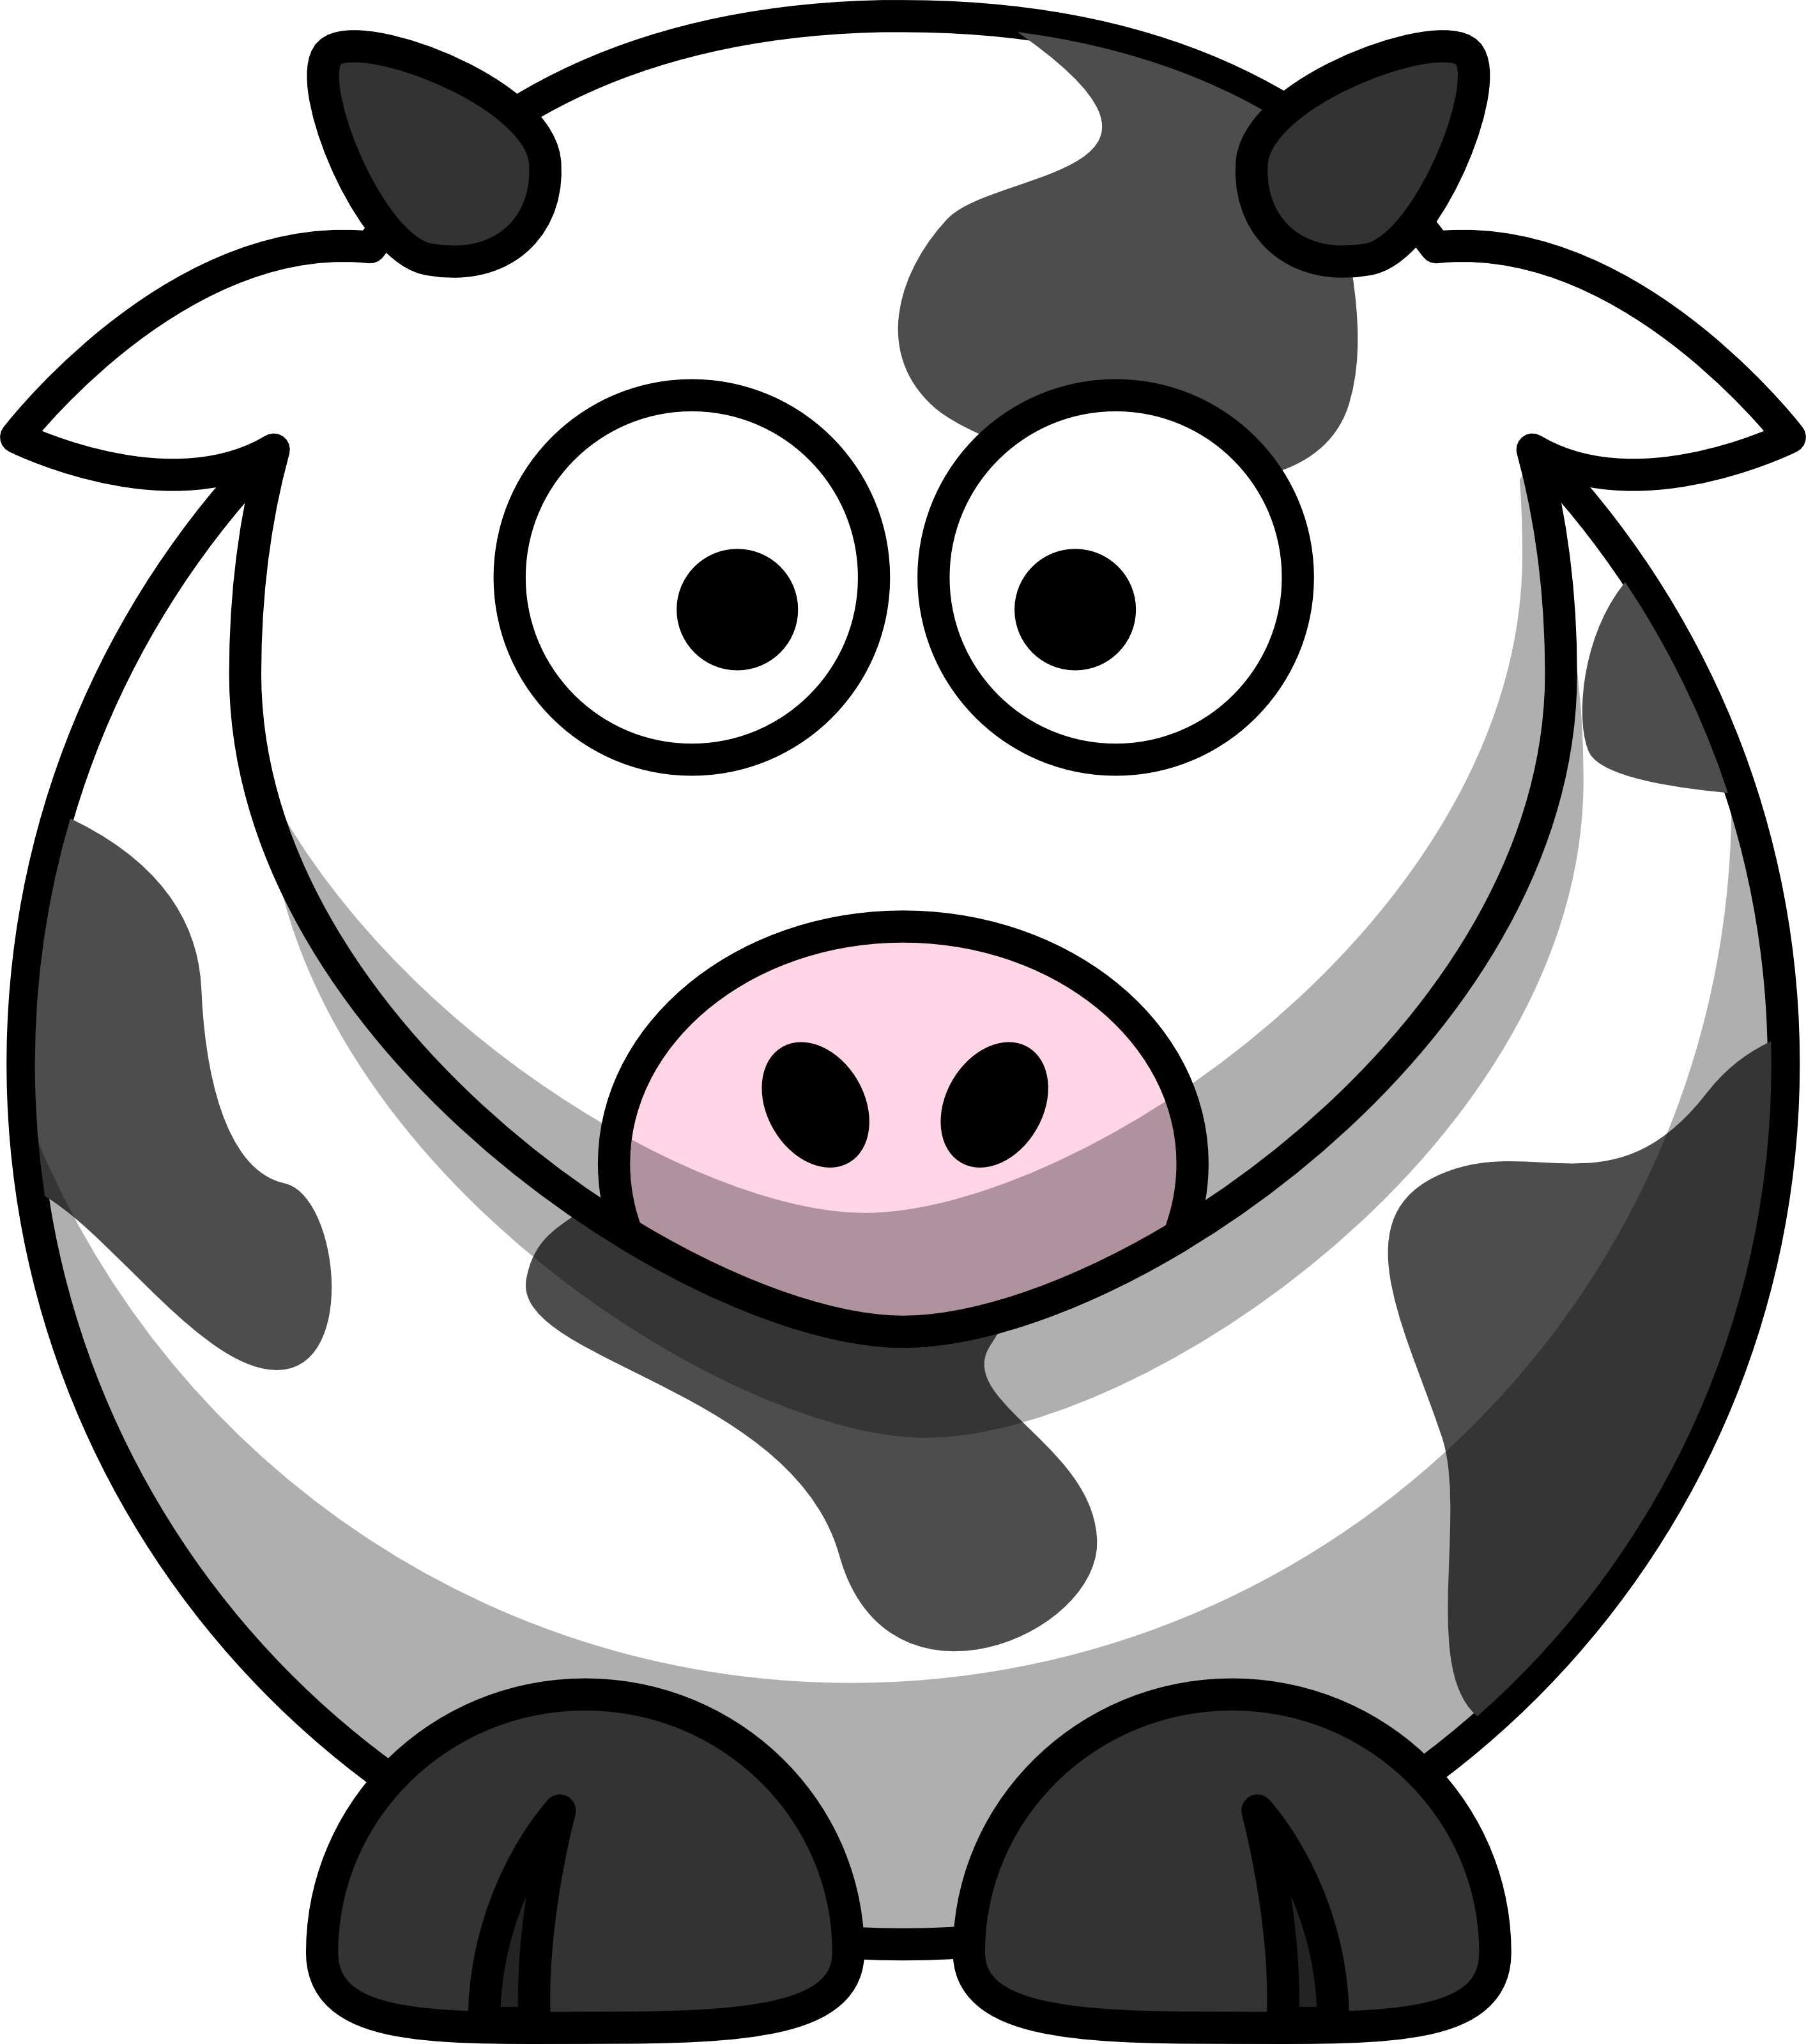 Cows clipart easy.